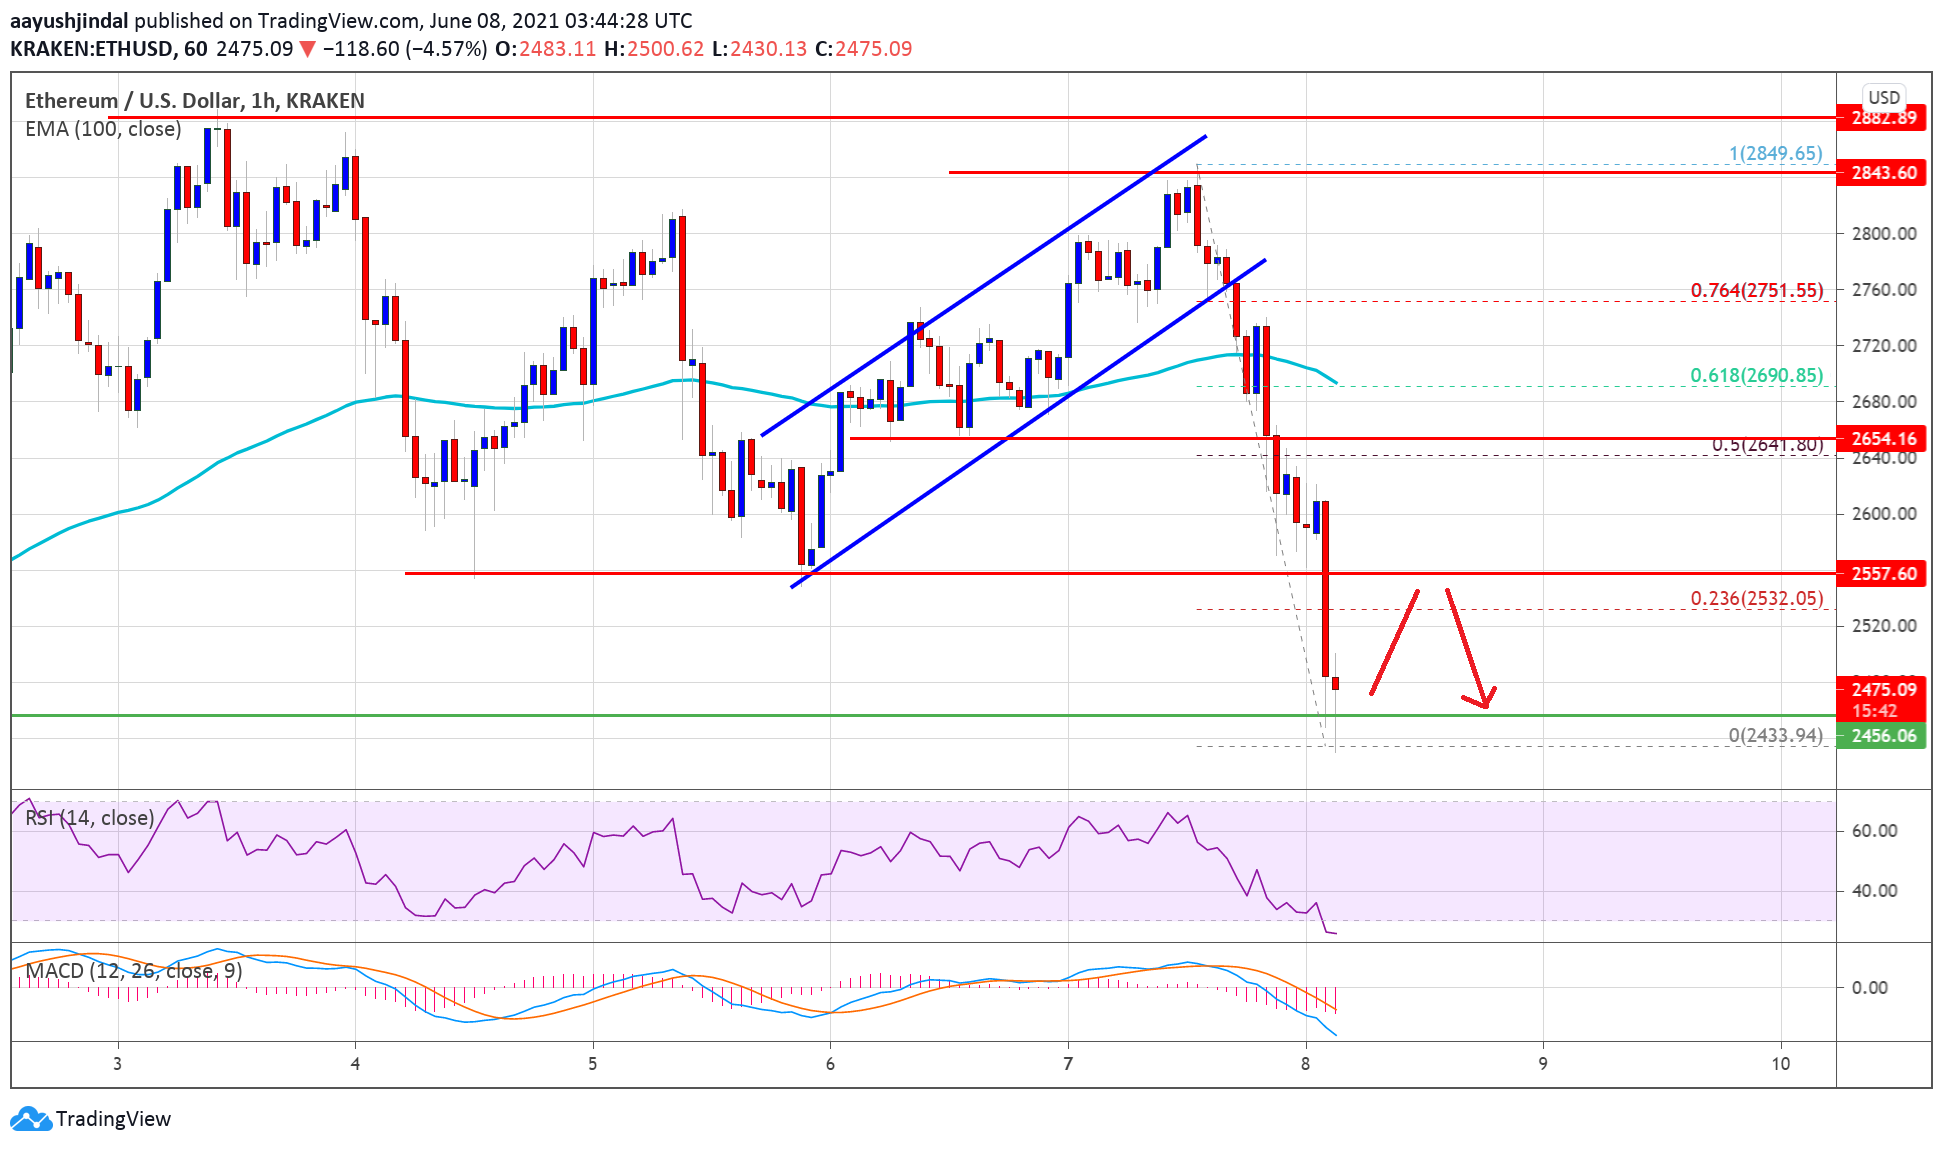 TA: Ethereum Topside Bias Vulnerable, What Could Trigger Sharp Decline